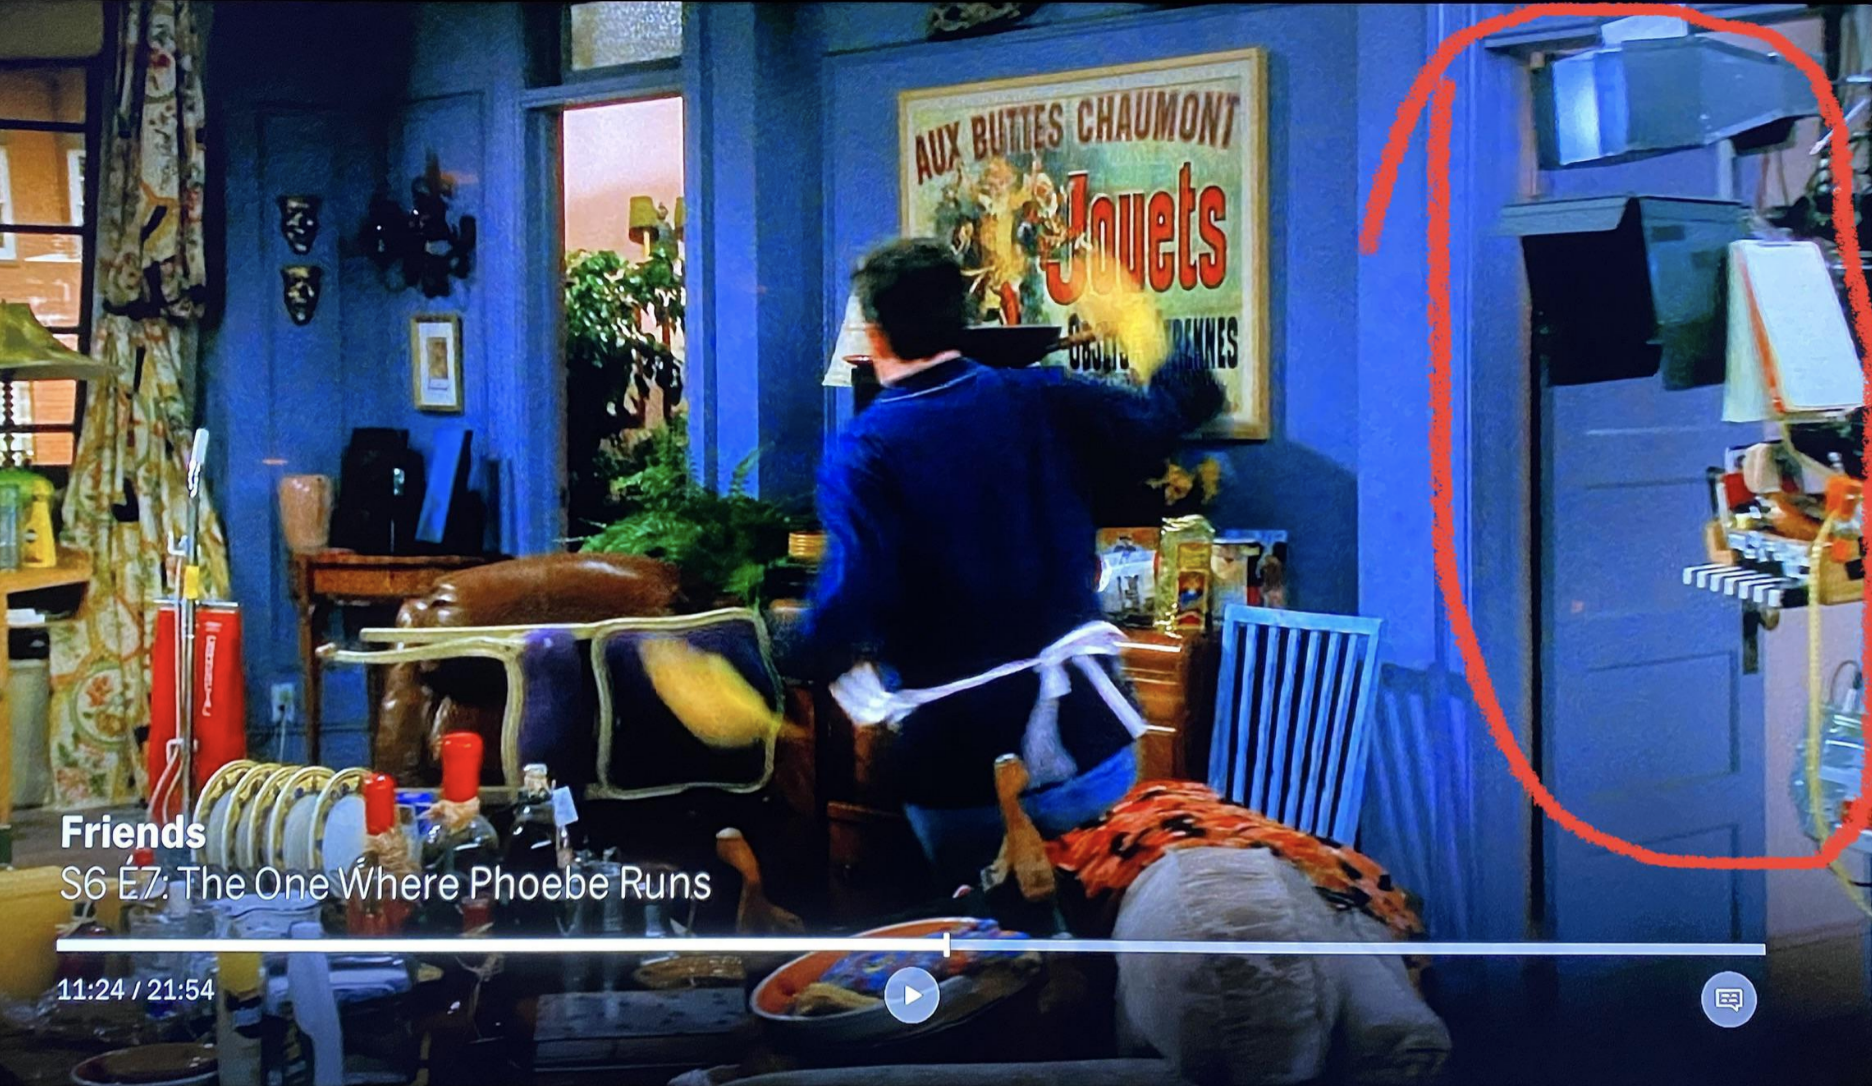 A camera in the shot in an episode of &quot;Friends&quot;